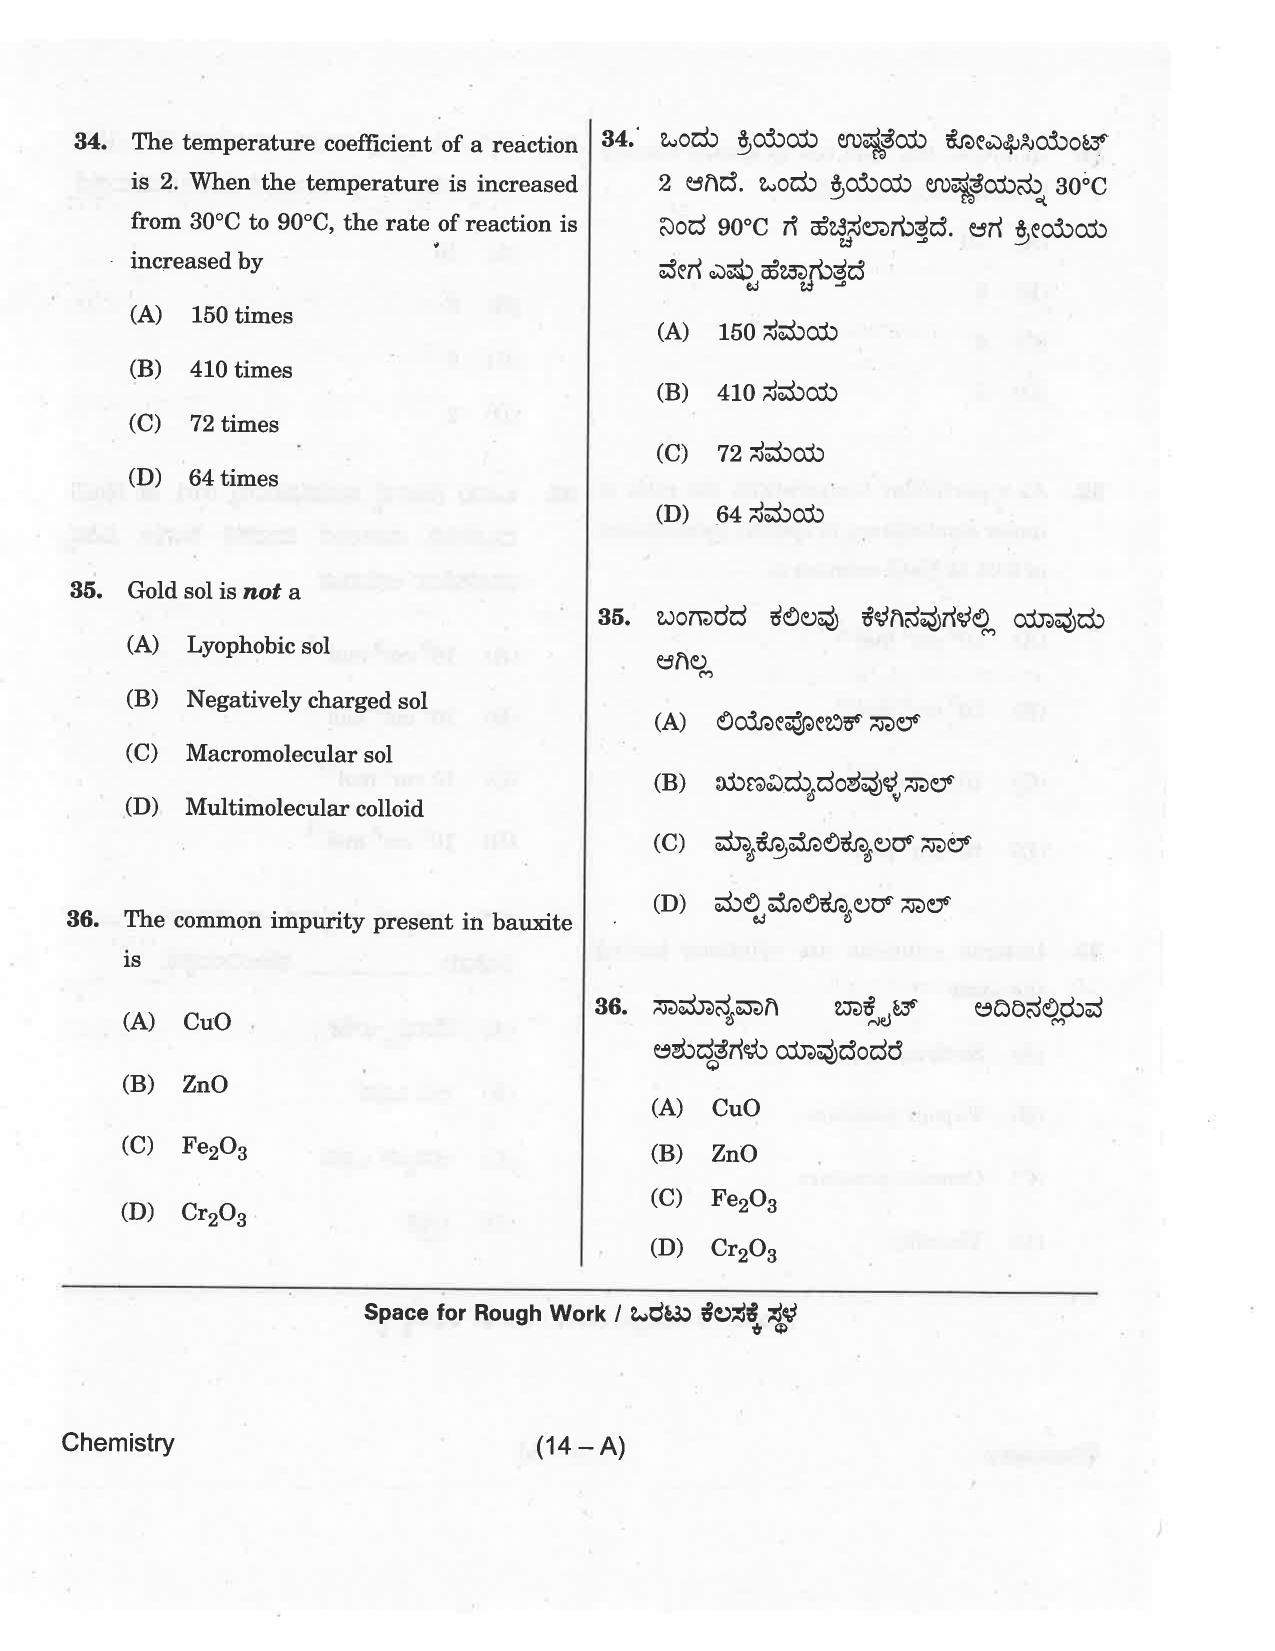 KCET Chemistry 2018 Question Papers - Page 14